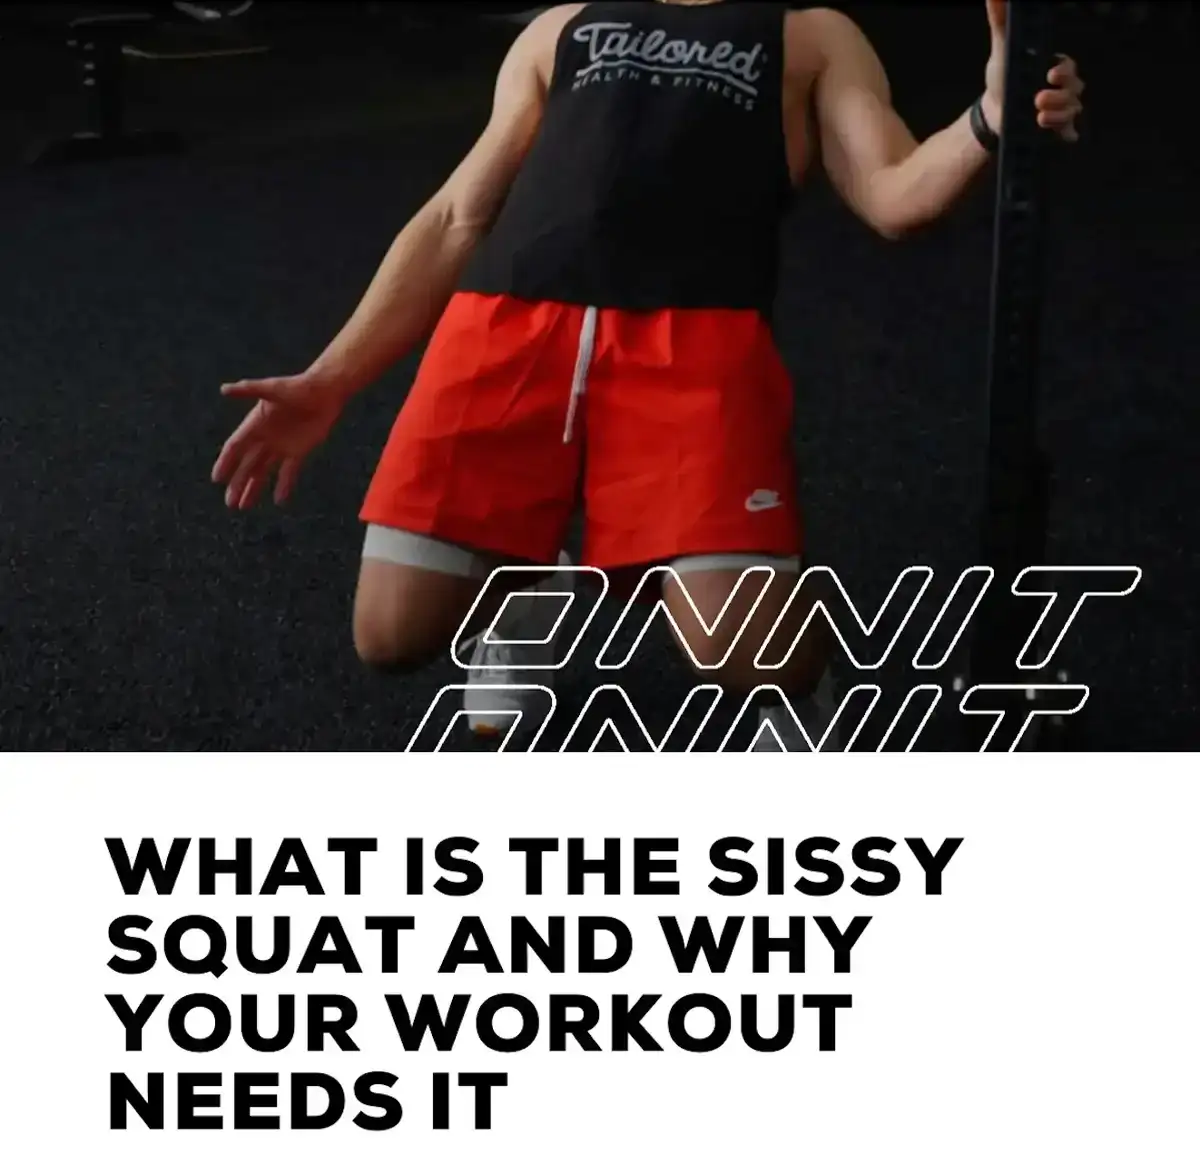 What Is The Sissy Squat and Why Your Workout Needs It